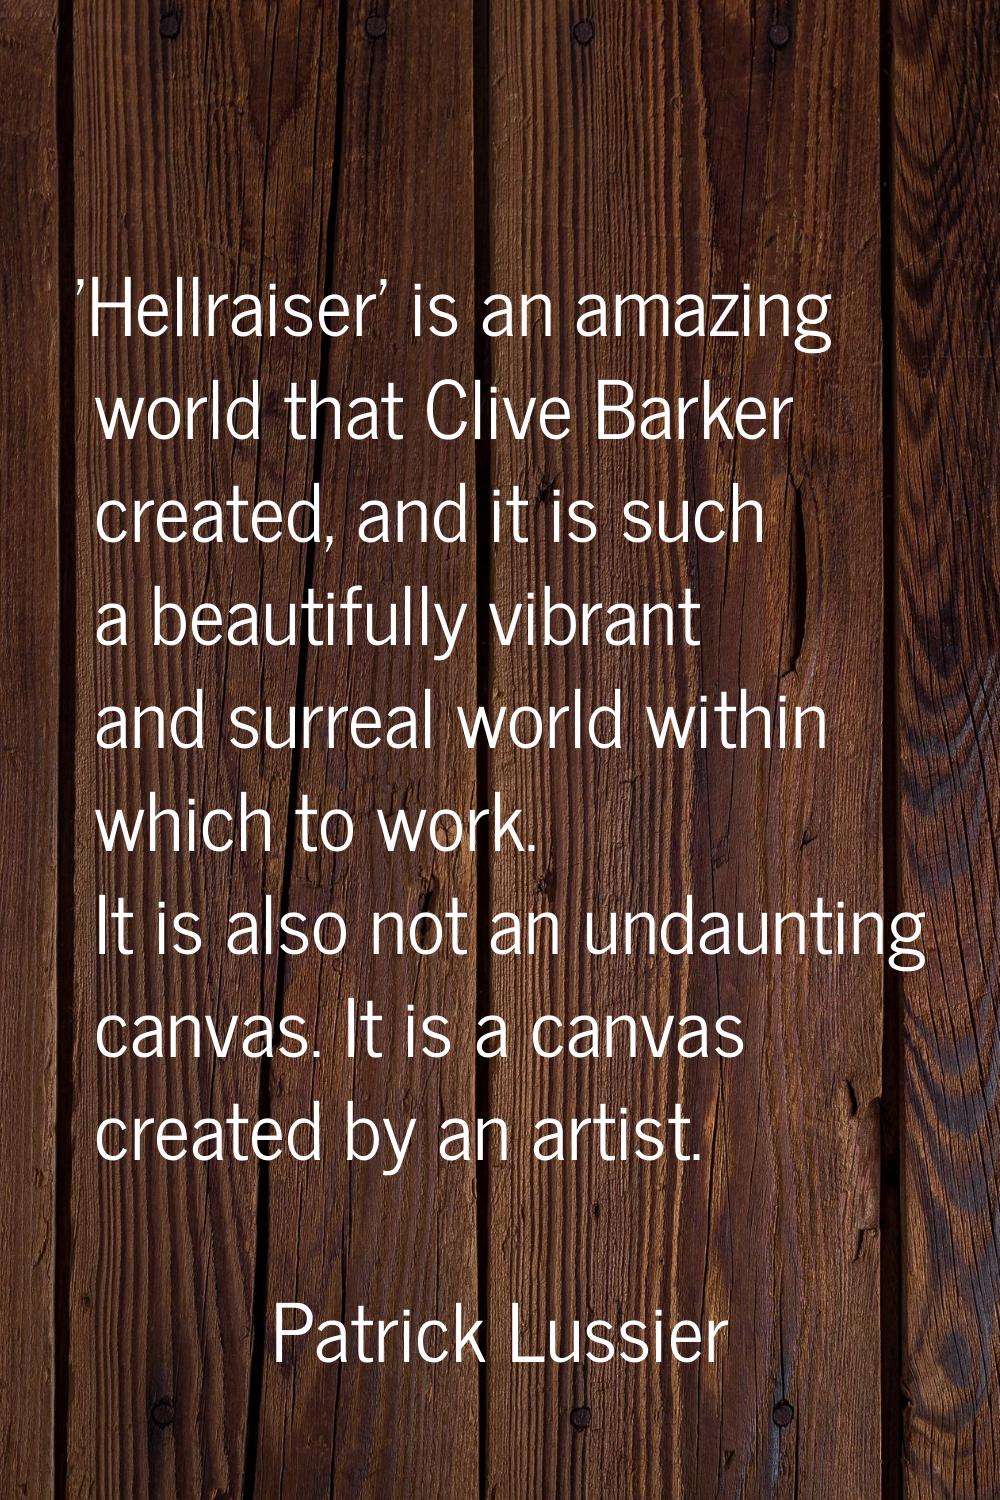 'Hellraiser' is an amazing world that Clive Barker created, and it is such a beautifully vibrant an